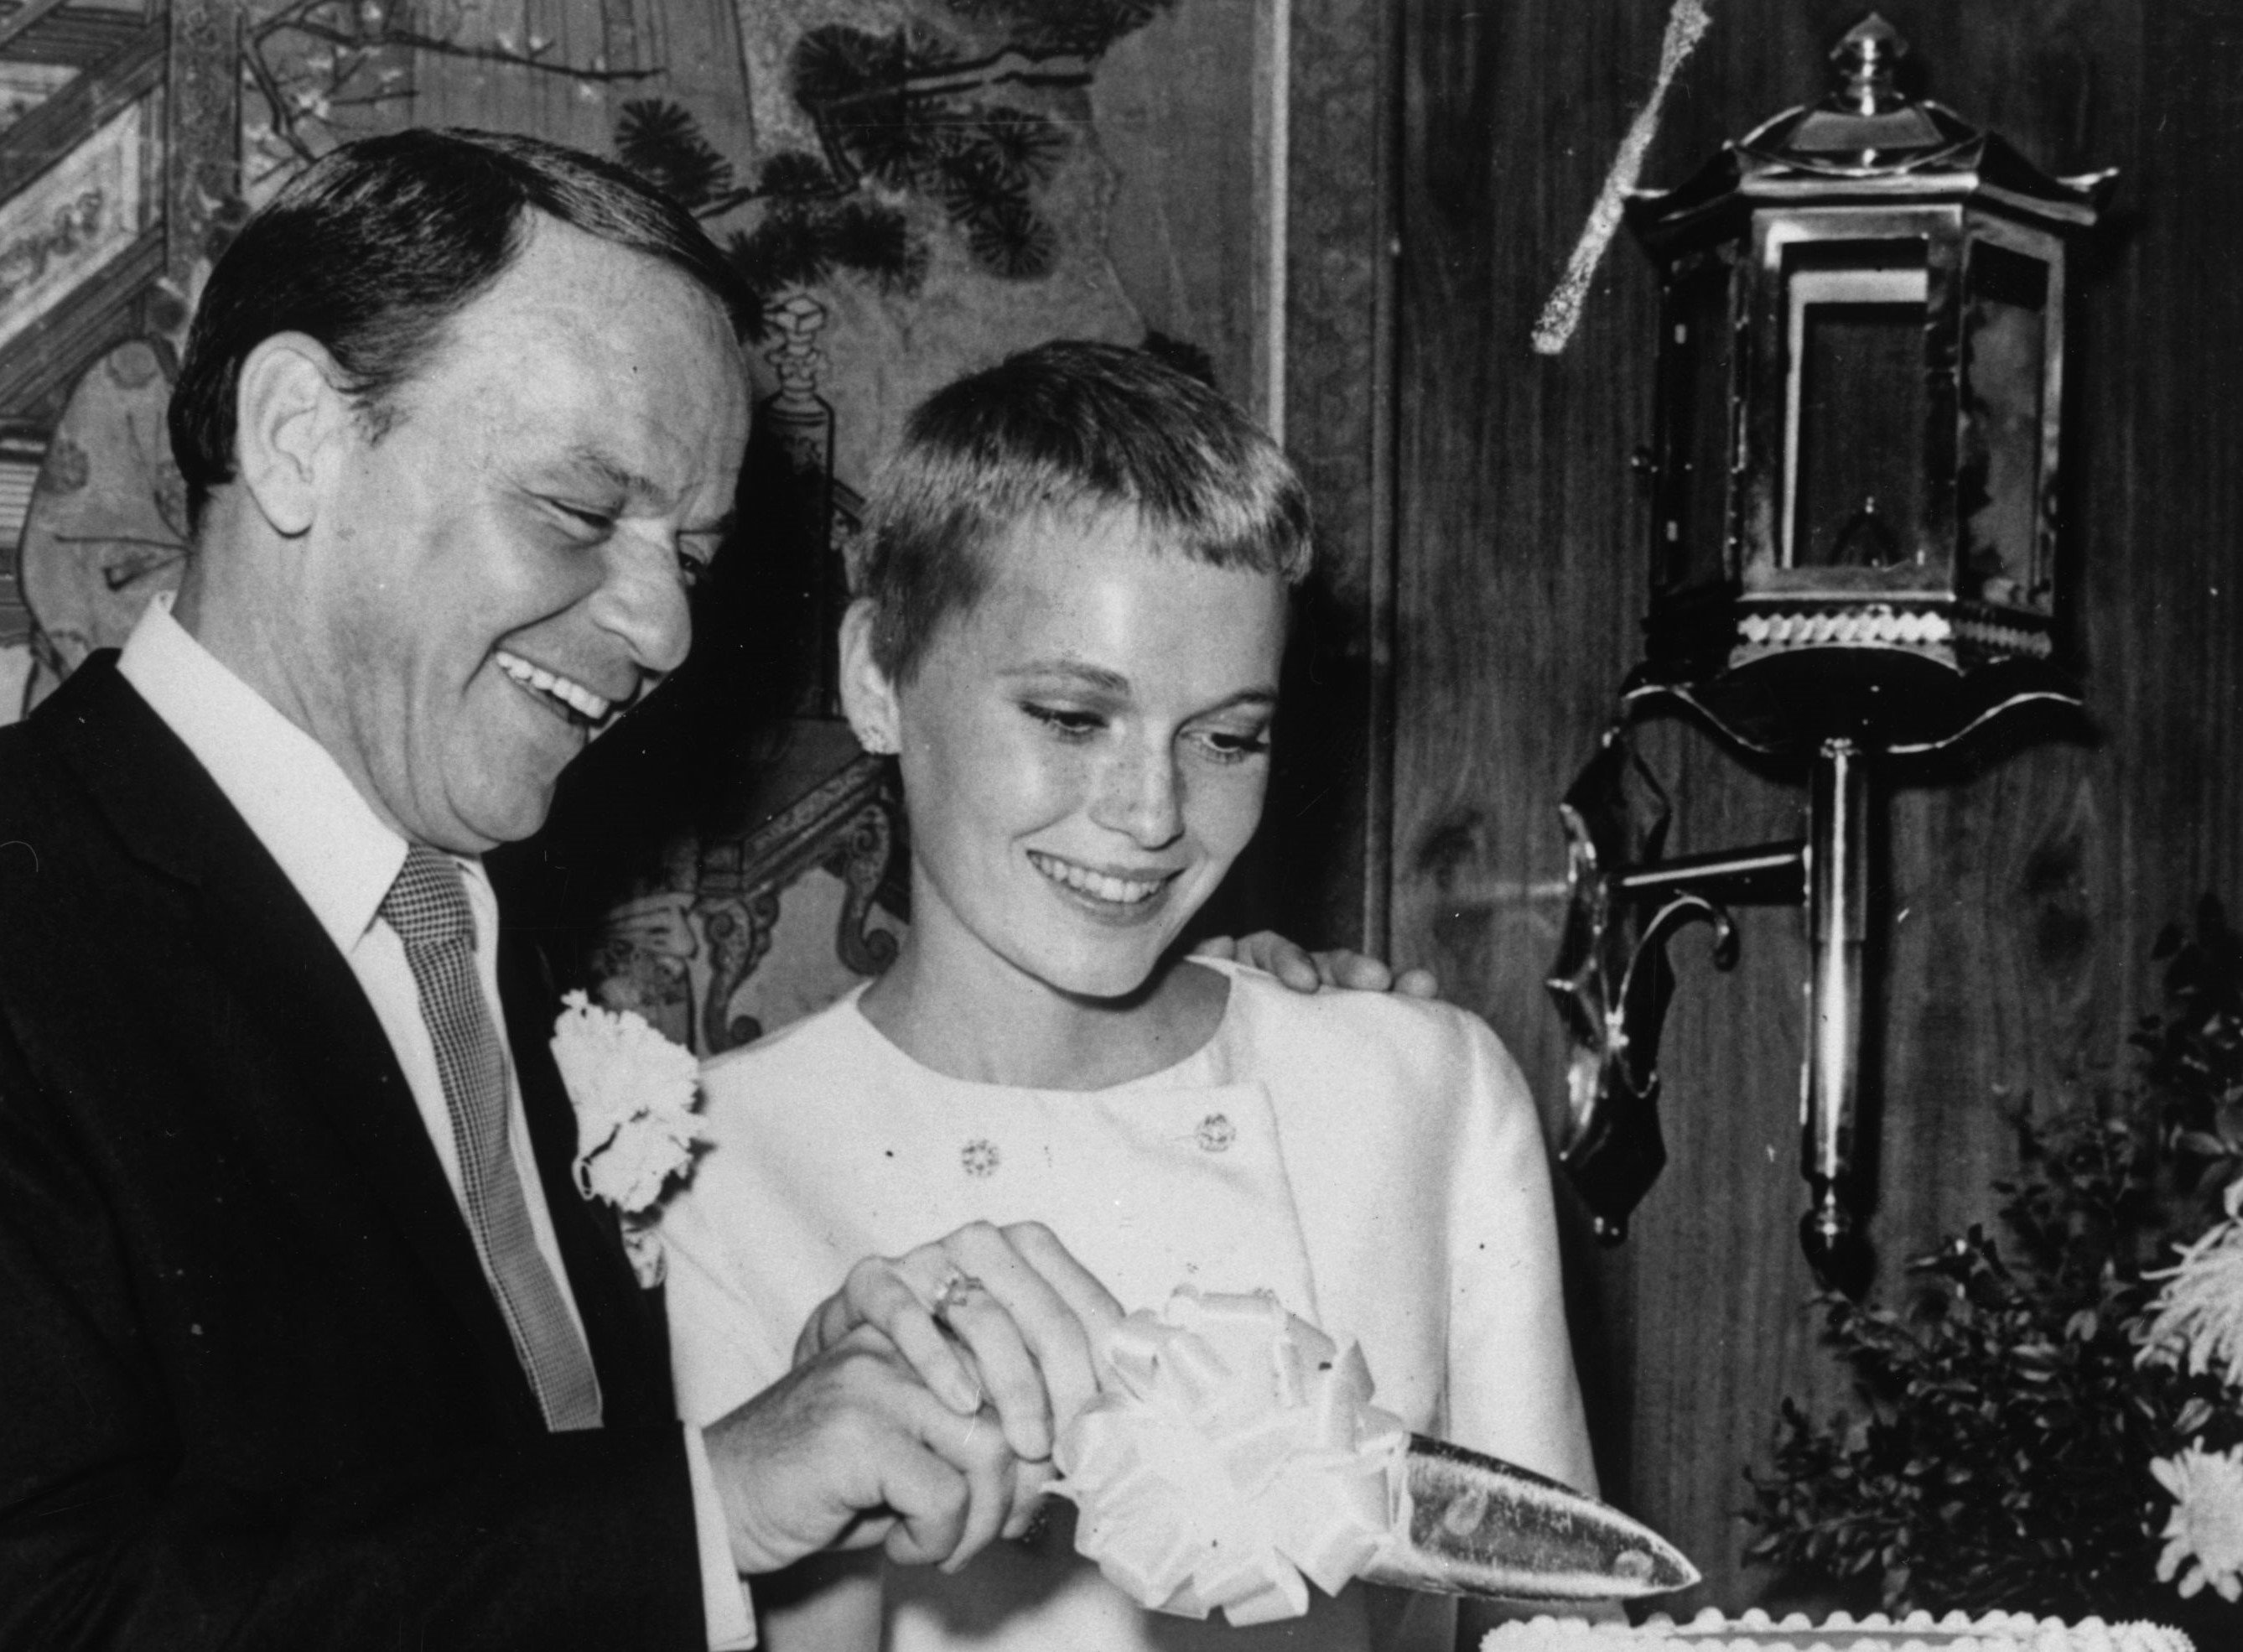 A black and white photo of Frank Sinatra and Mia Farrow cutting into a cake on their wedding day.